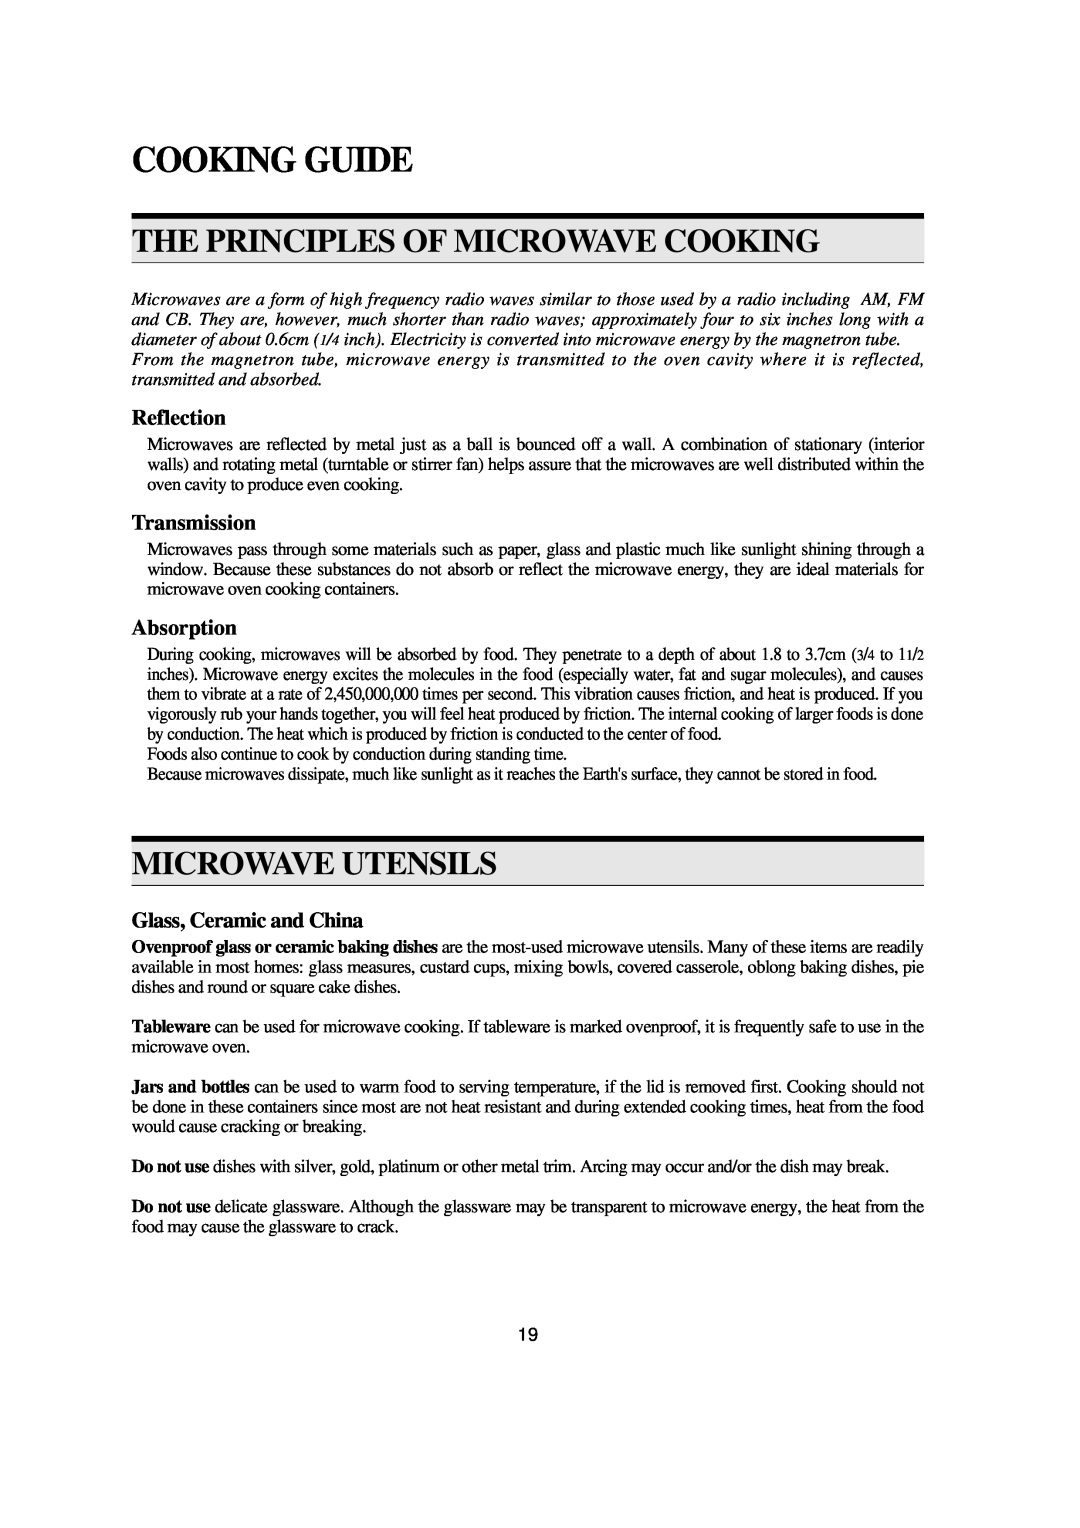 Emerson MW8993WC/BC Cooking Guide, The Principles Of Microwave Cooking, Microwave Utensils, Reflection, Transmission 